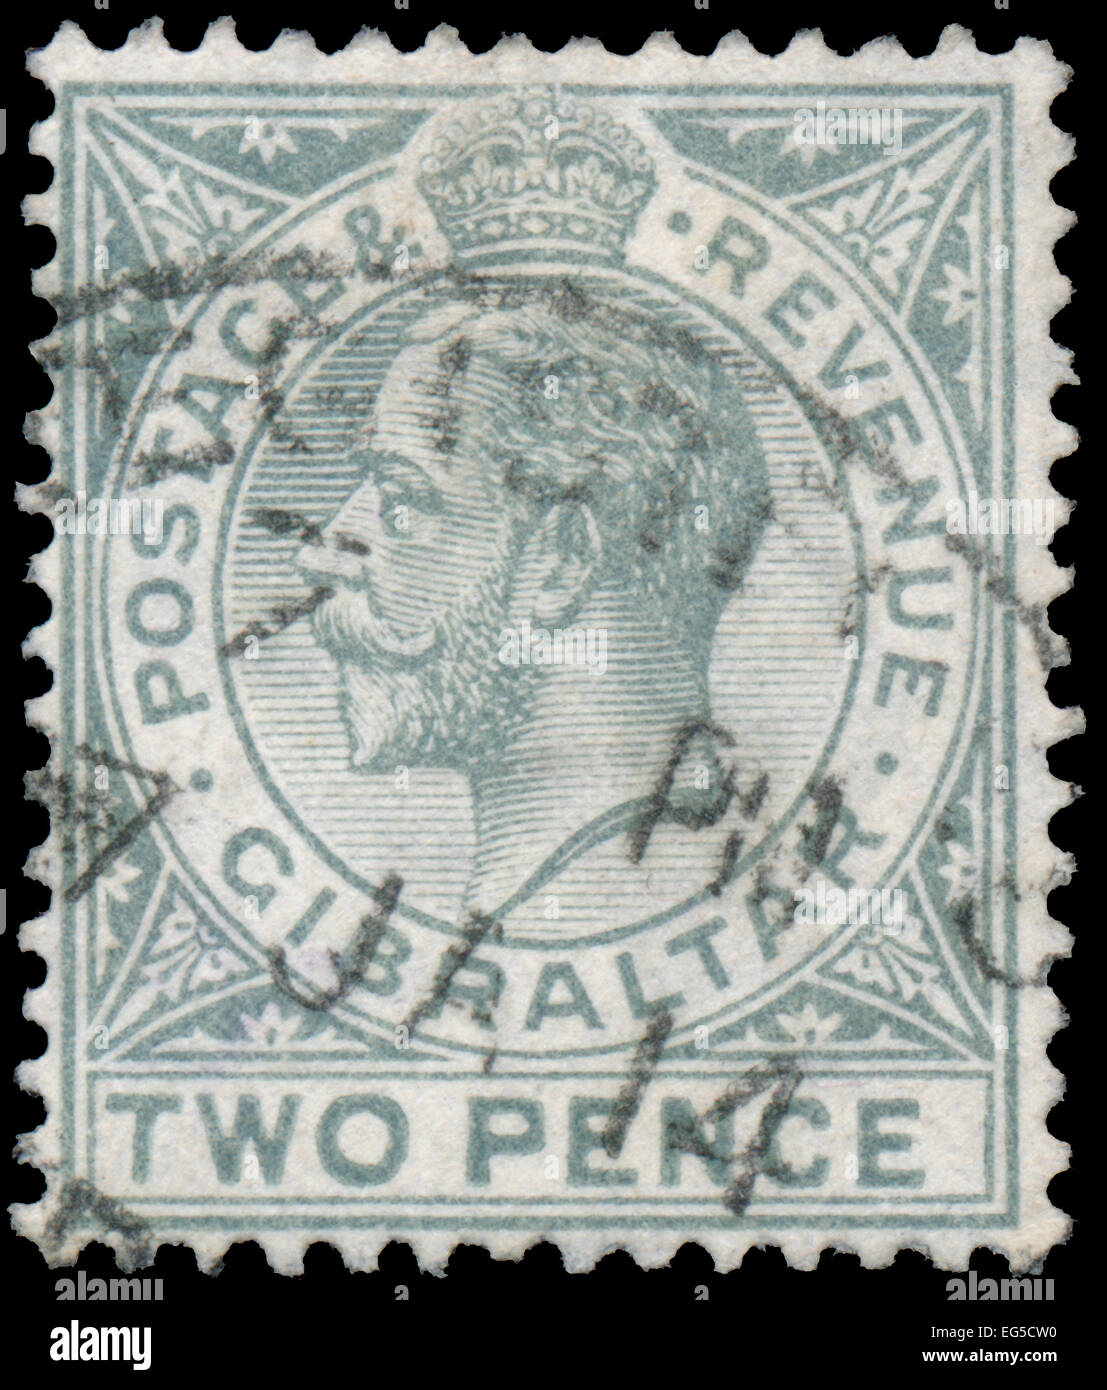 GIBRALTAR - CIRCA 1912: A stamp printed in GIBRALTAR shows image of the George V was King of the United Kingdom and the Dominion Stock Photo